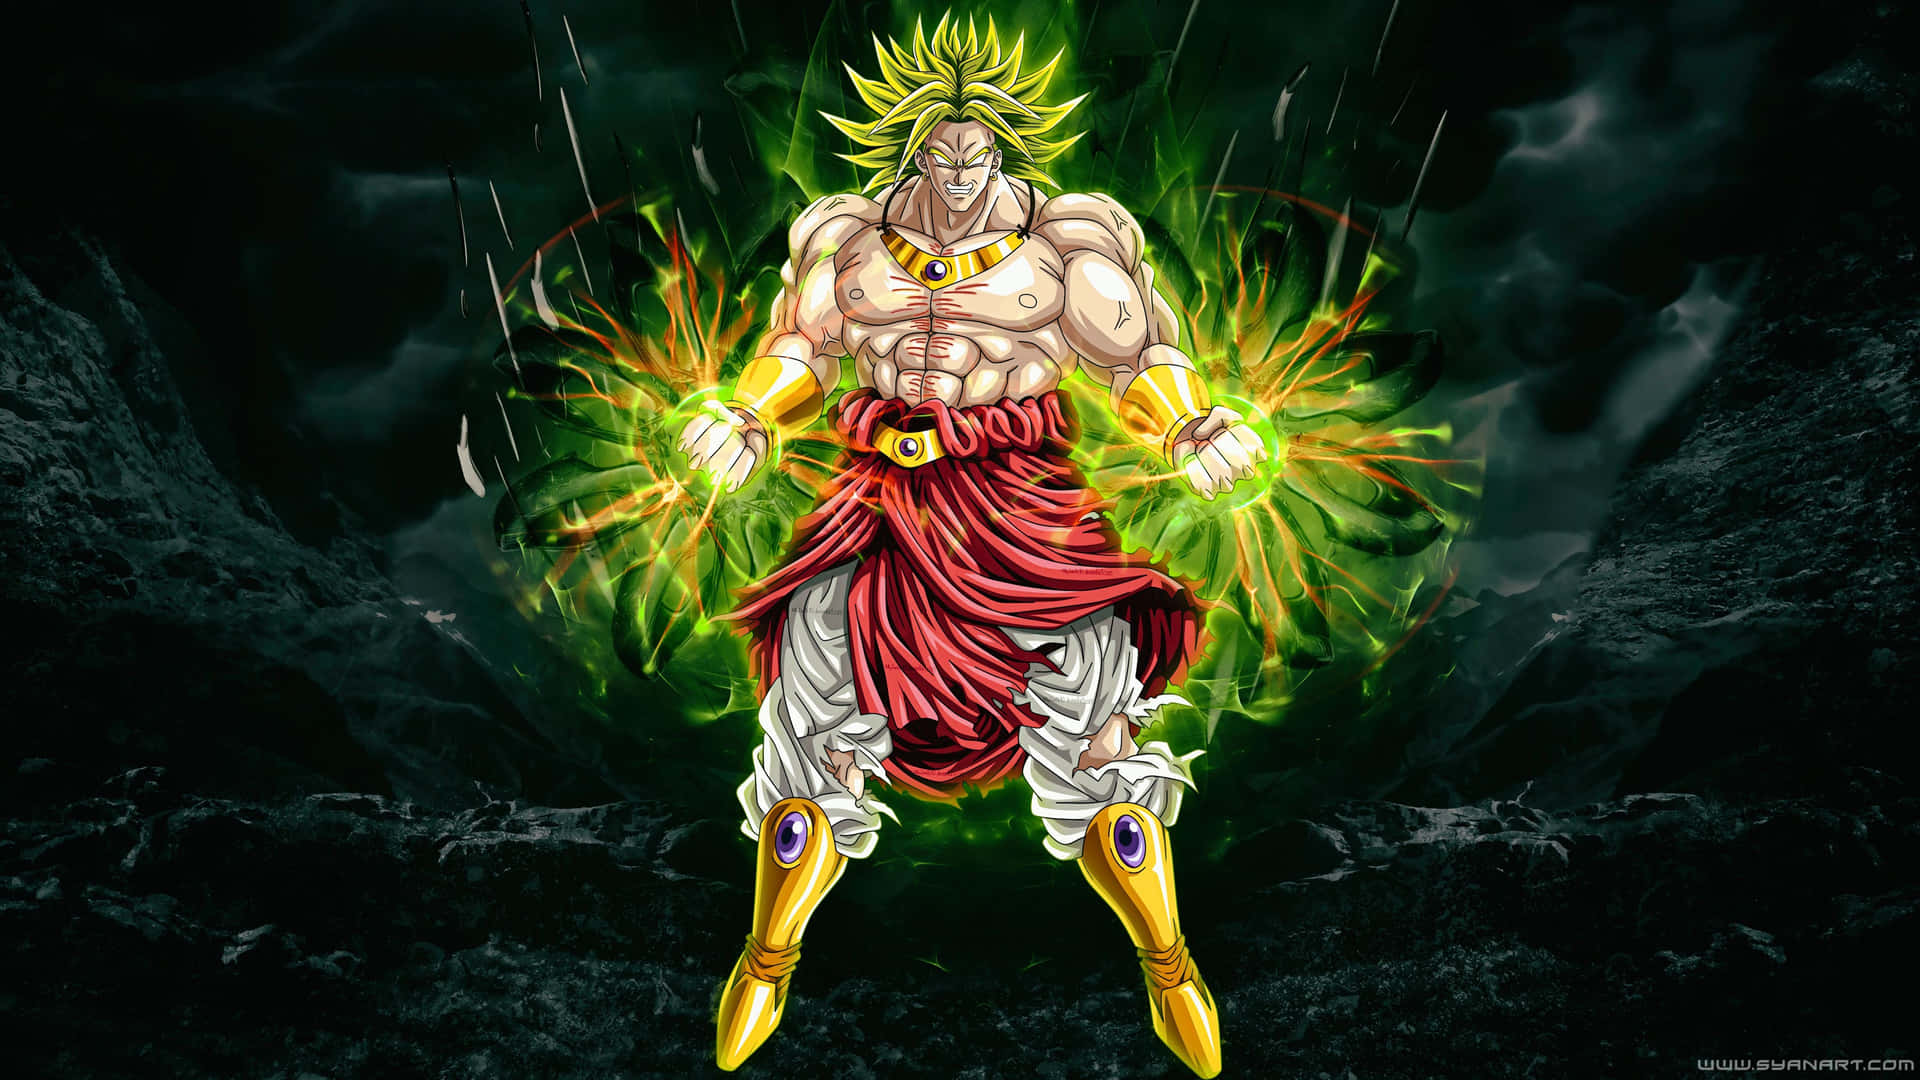 Unleash Your Power With The Broly 4k Ultrahd Television. Wallpaper